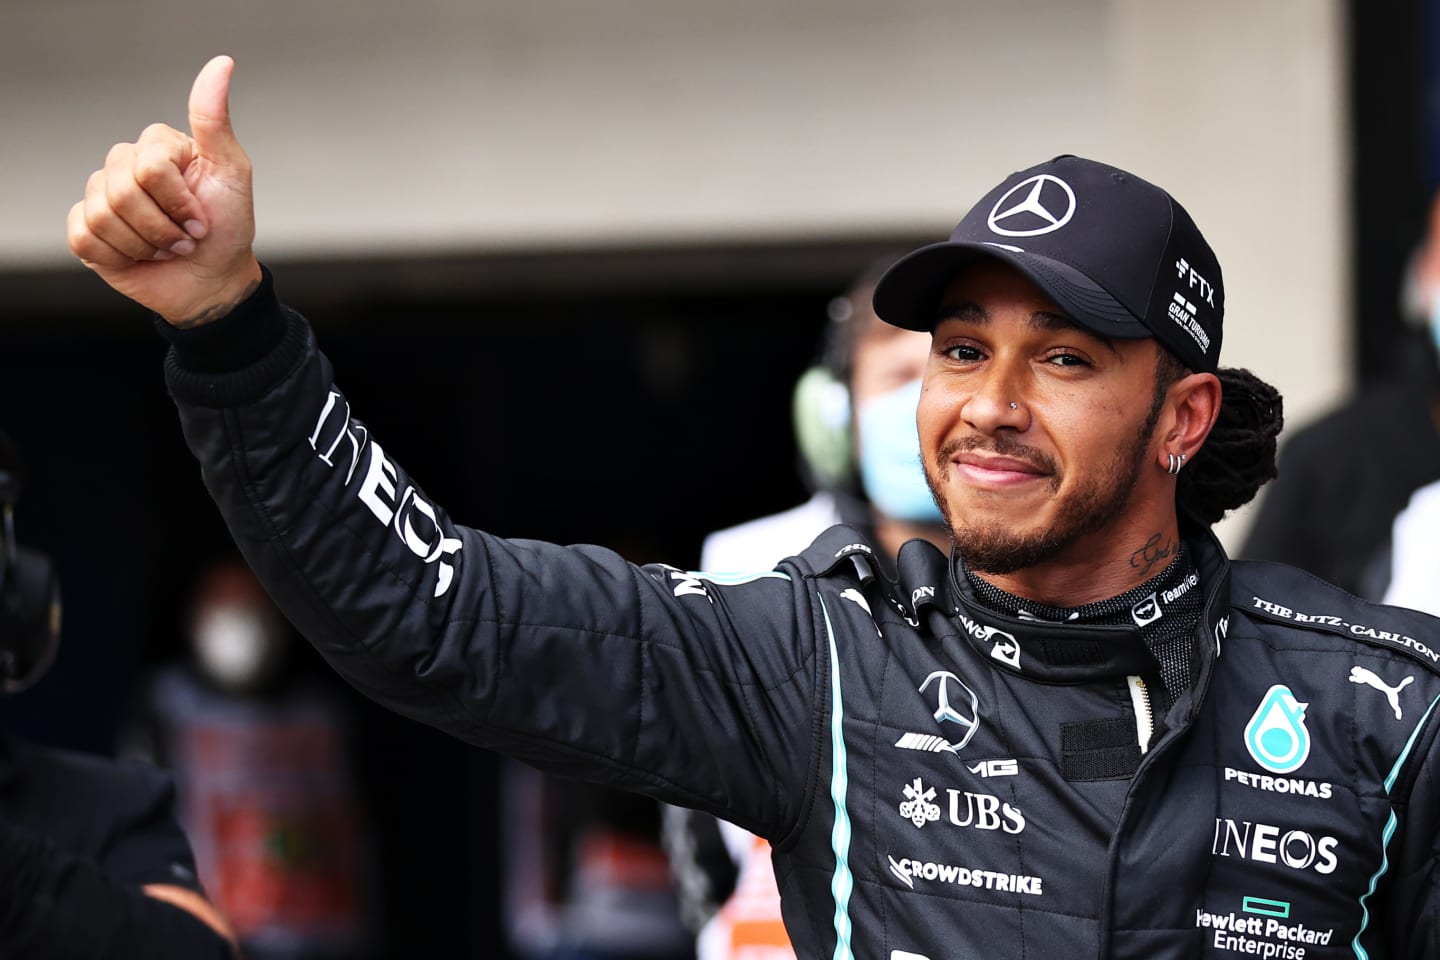 SAO PAULO, BRAZIL - NOVEMBER 12: Fastest qualifier Lewis Hamilton of Great Britain and Mercedes GP celebrates in parc ferme during qualifying ahead of the F1 Grand Prix of Brazil at Autodromo Jose Carlos Pace on November 12, 2021 in Sao Paulo, Brazil. (Photo by Lars Baron/Getty Images)